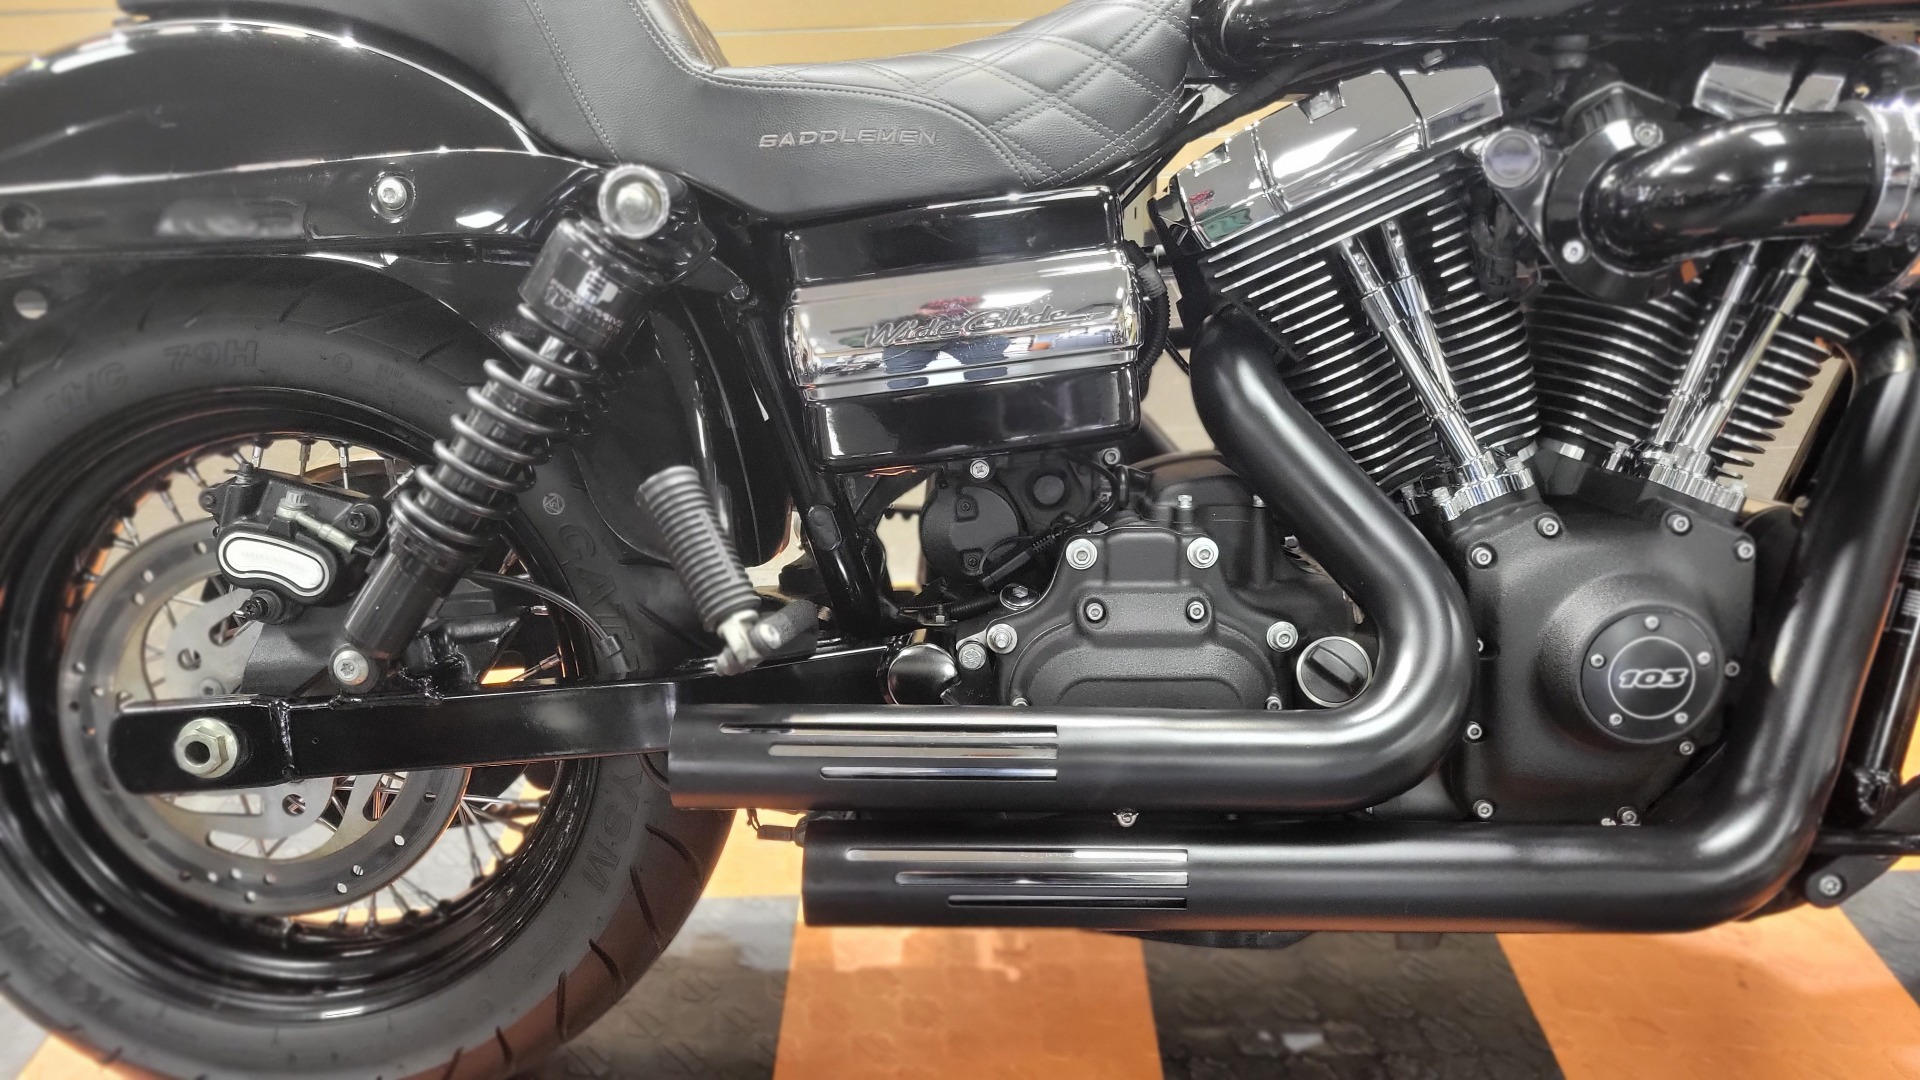 2013 Harley-Davidson Dyna® Wide Glide® in The Woodlands, Texas - Photo 7